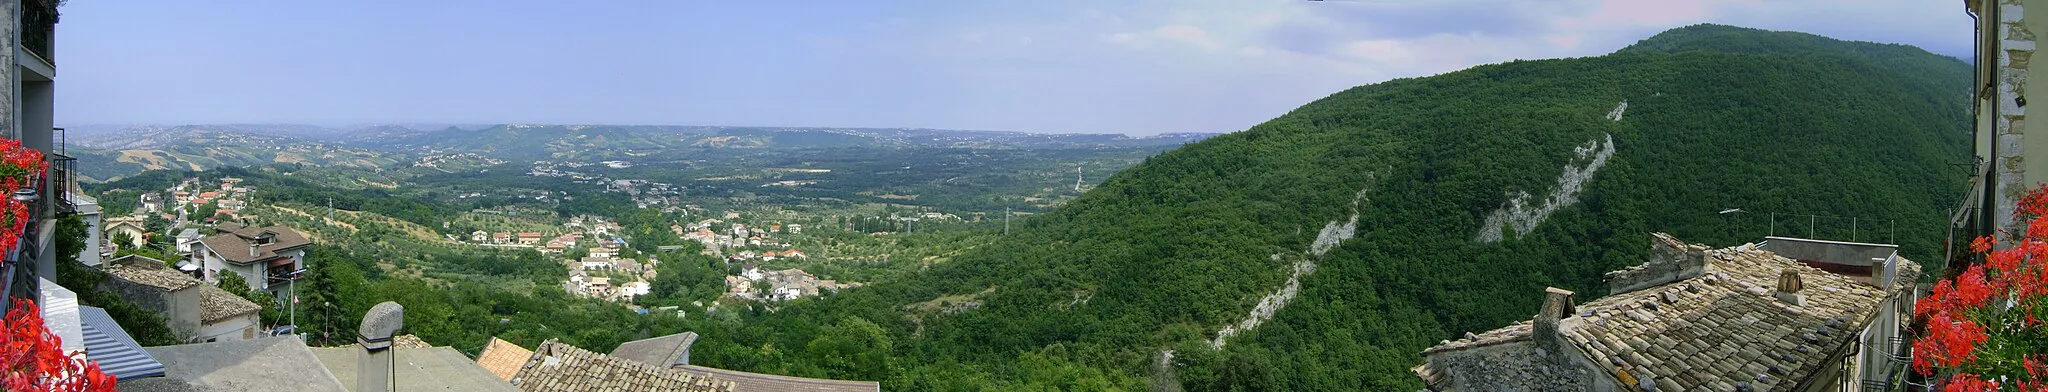 Photo showing: Panoramic view from Pretoro, in the province of Chieti, Abruzzo